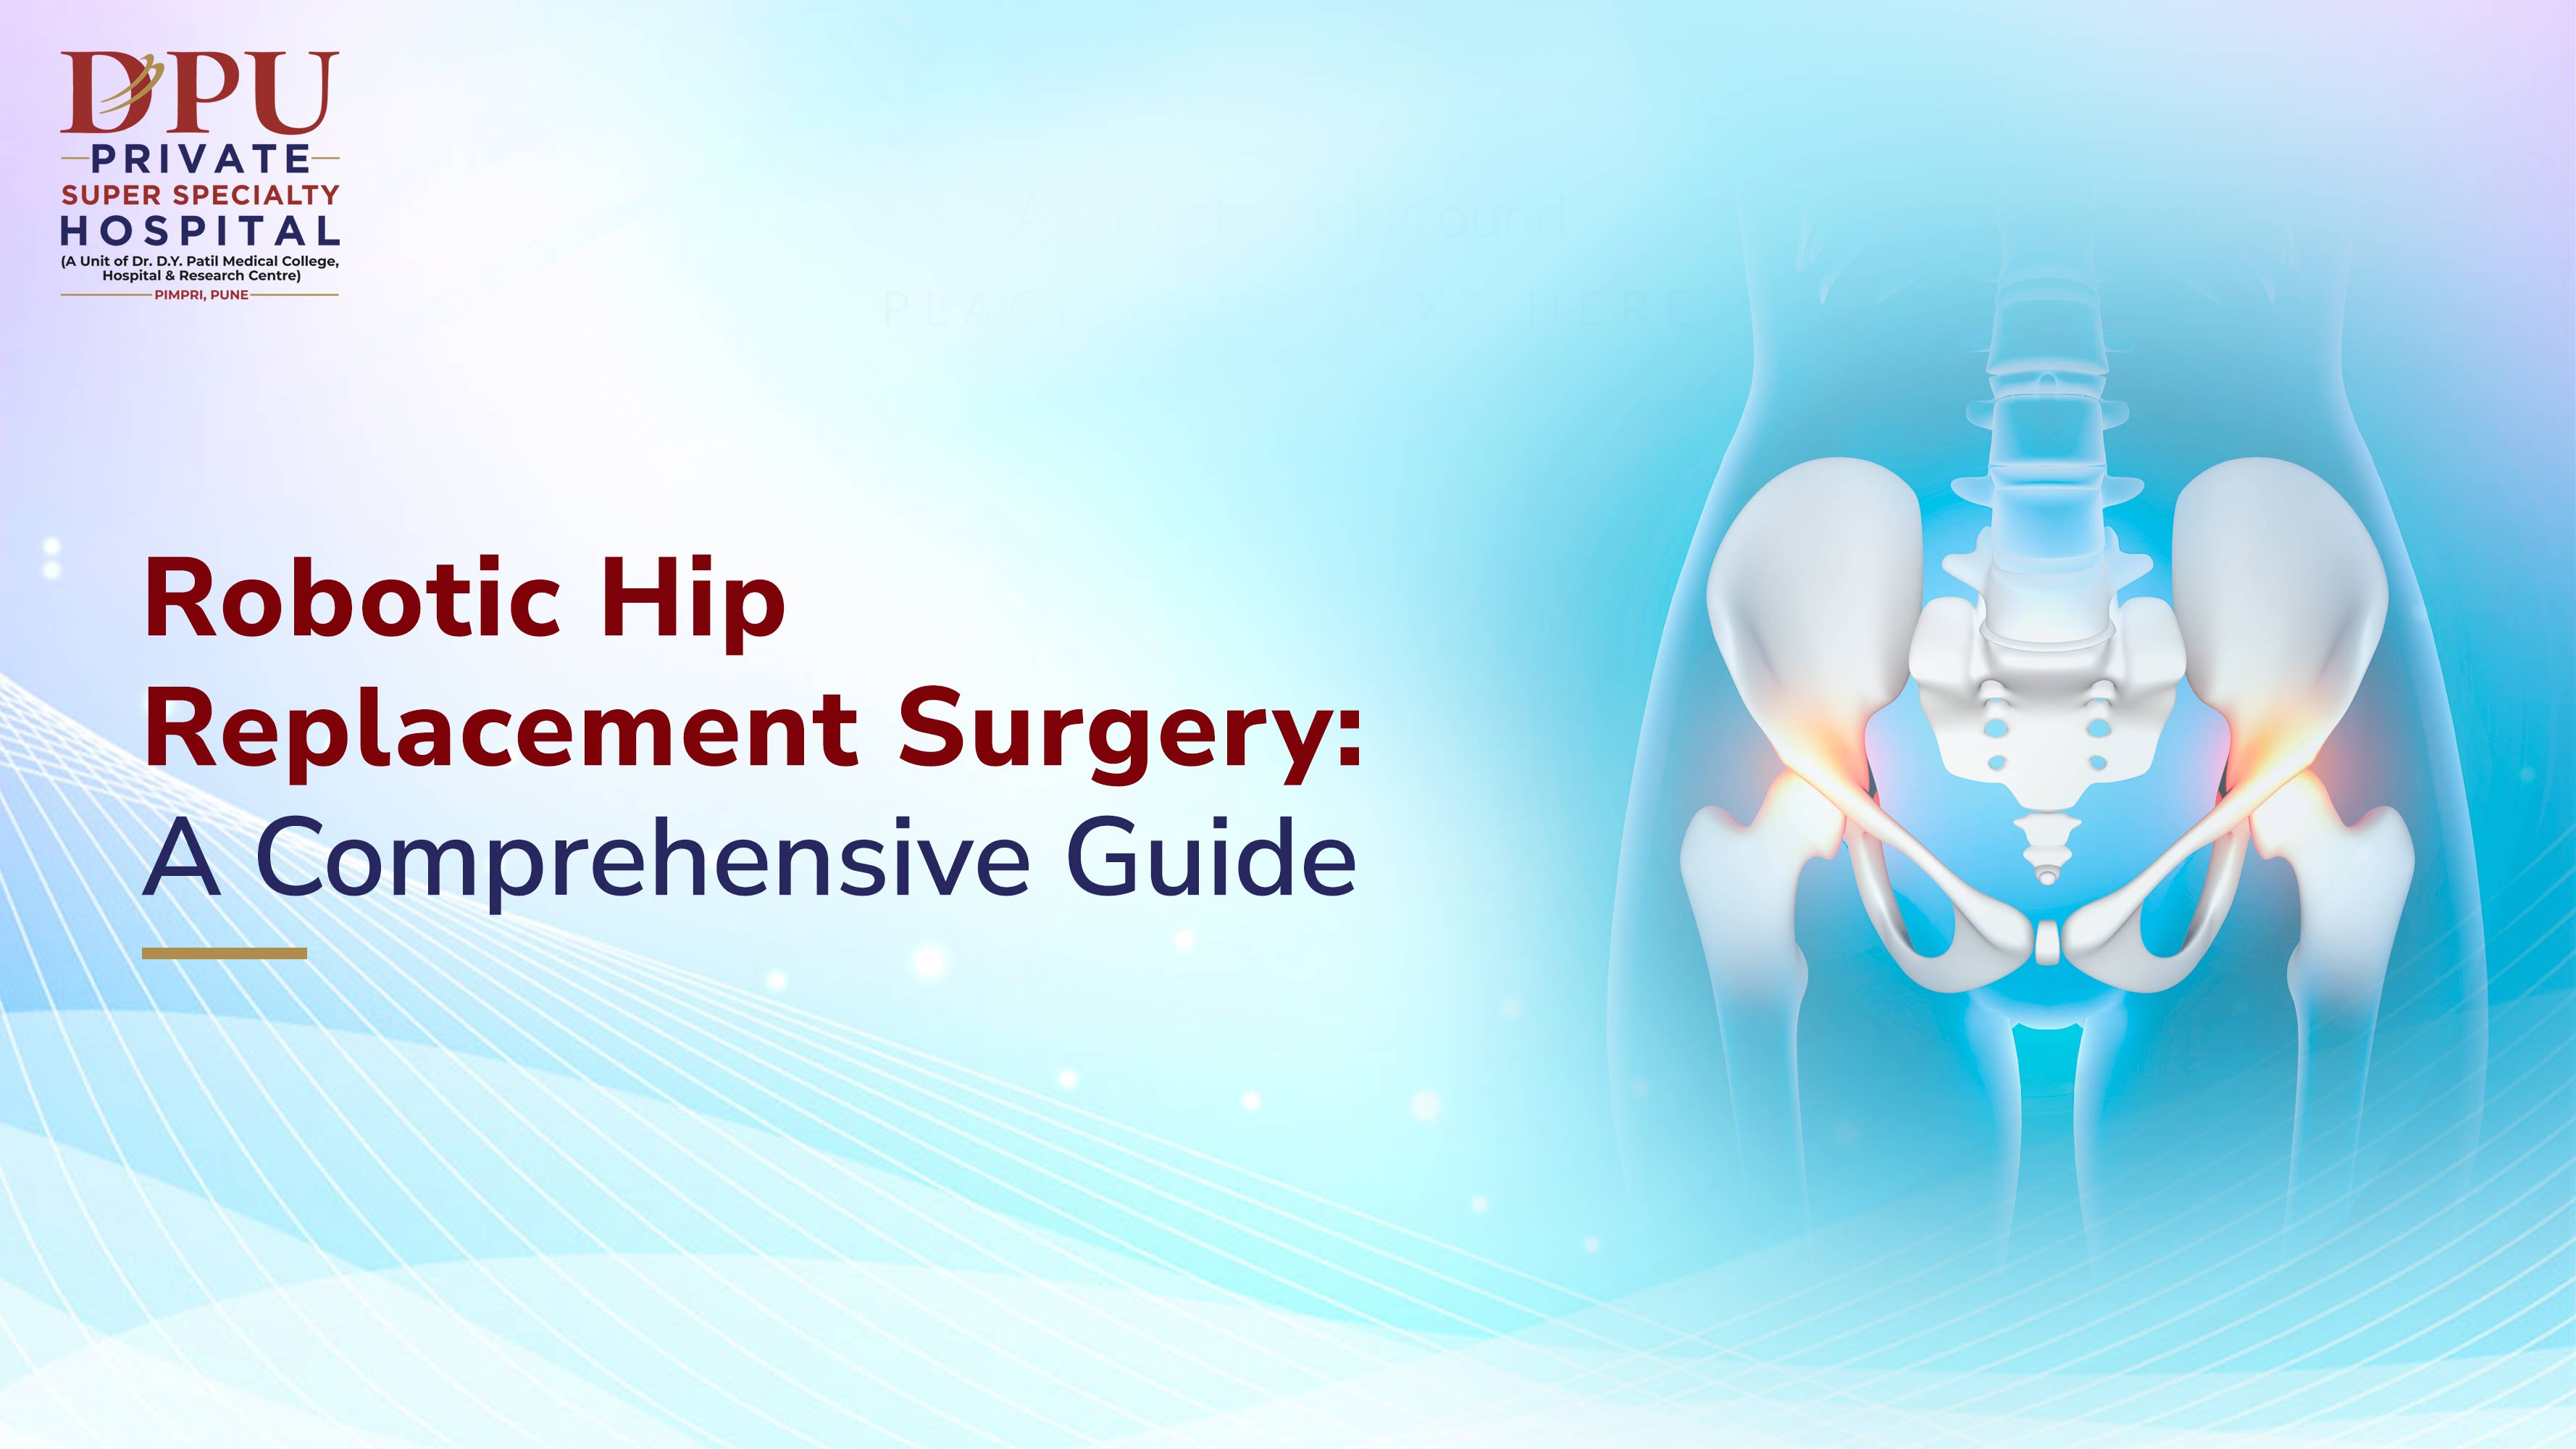 Robotic Hip Replacement Surgery Guide